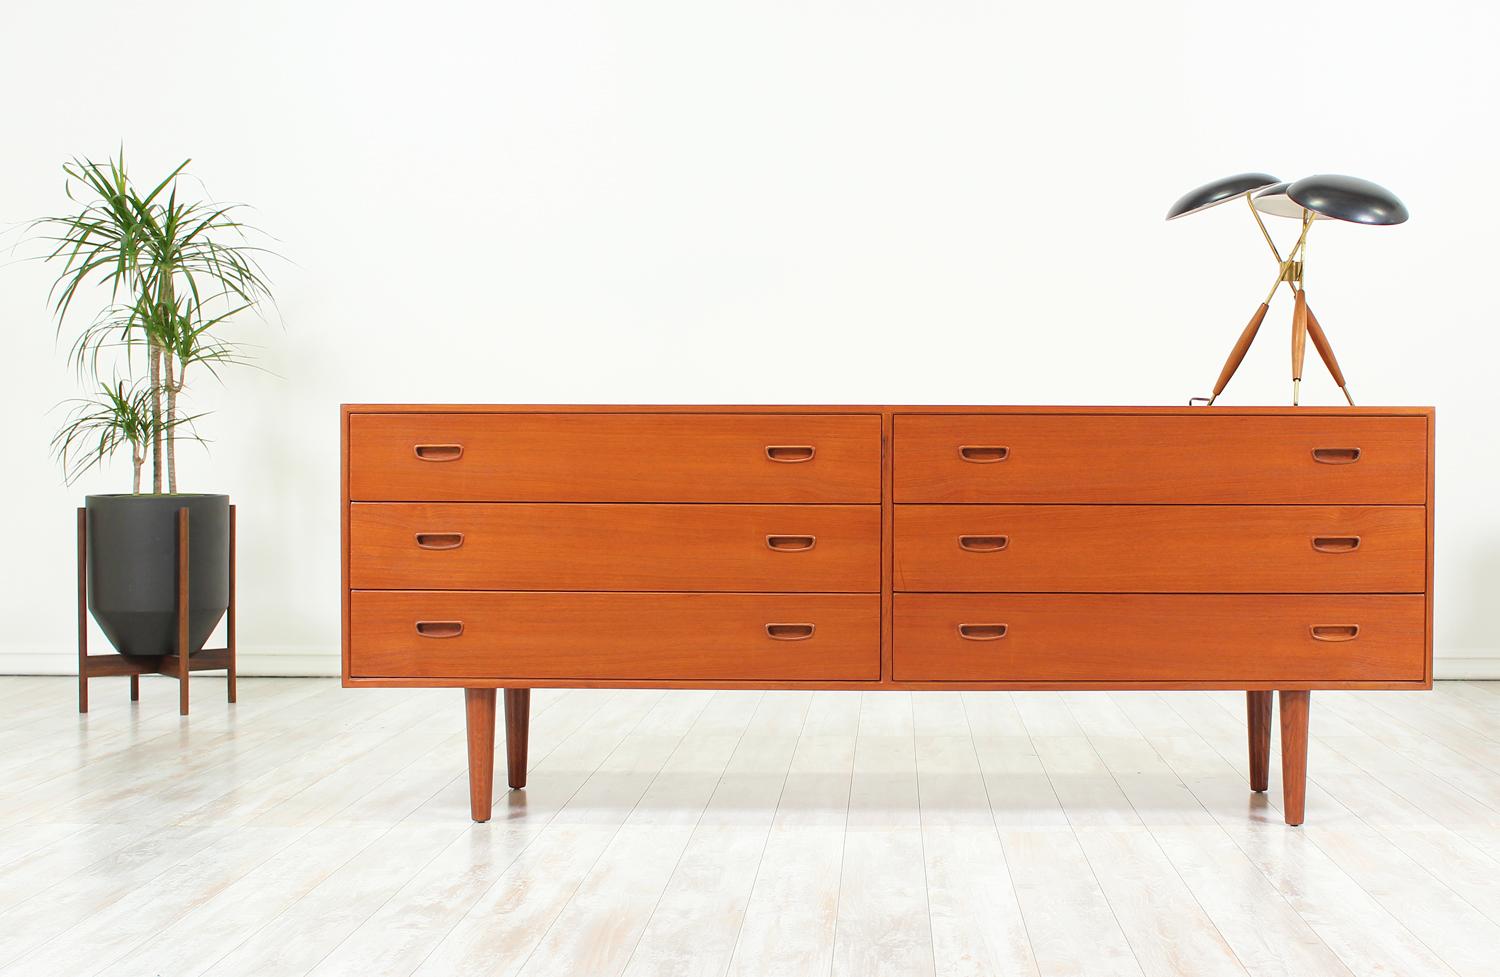 Elegant dresser designed by Arne Wahl Iversen for Vinde Møbelfabrik in Denmark circa 1950’s. This practical dresser is beautifully crafted in teak wood featuring plentiful storage options with recessed carved pulls and six dovetailed drawers. The